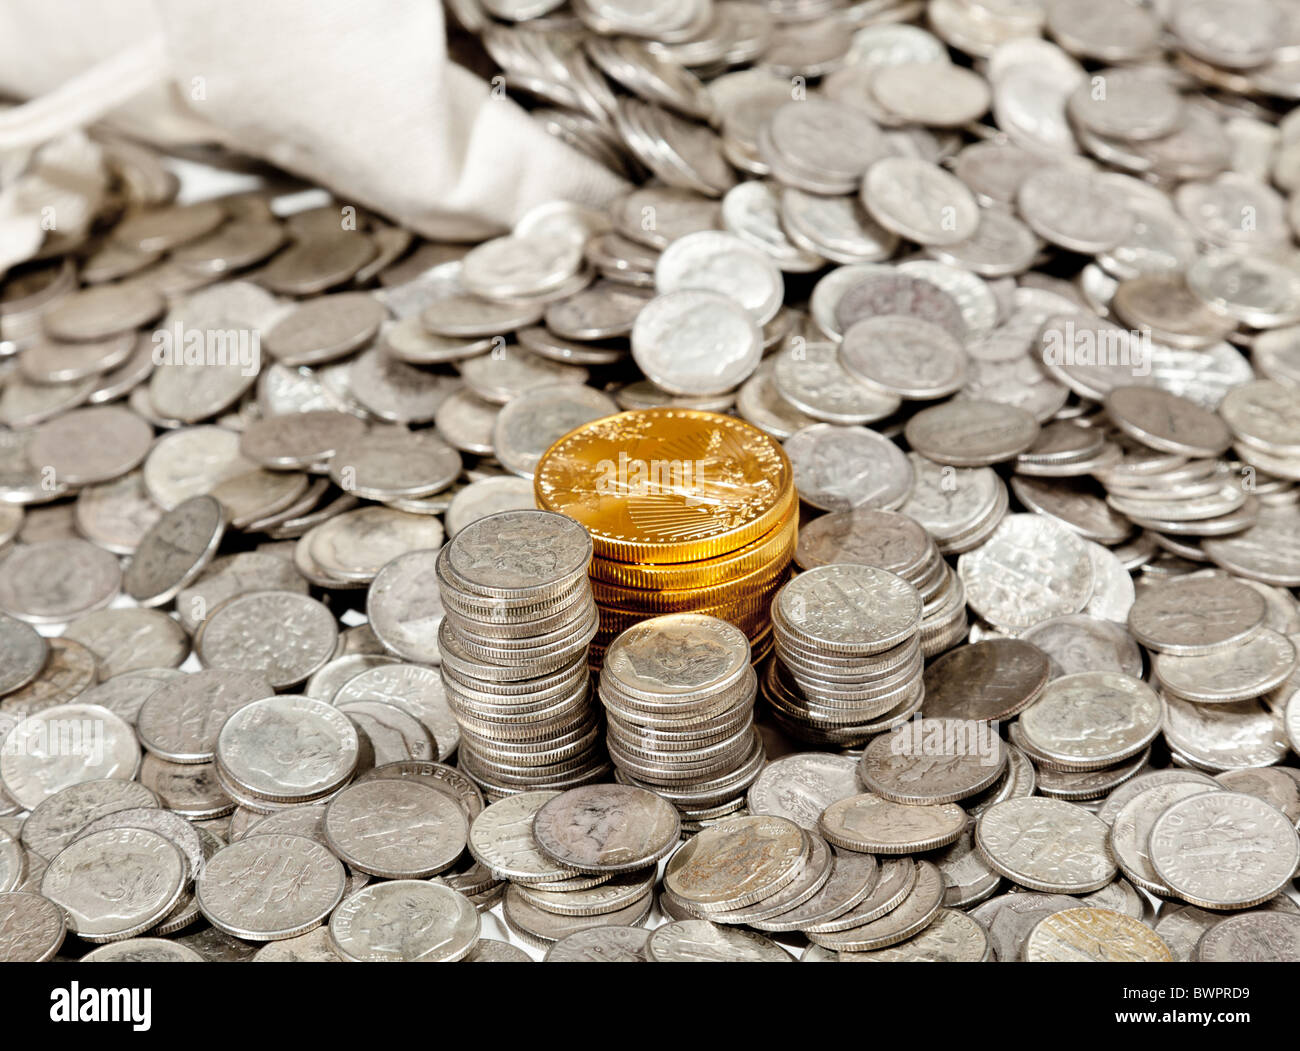 Linen bag of old pure silver coins used to invest in silver as a commodity with a selection of Golden Eagle gold coins Stock Photo